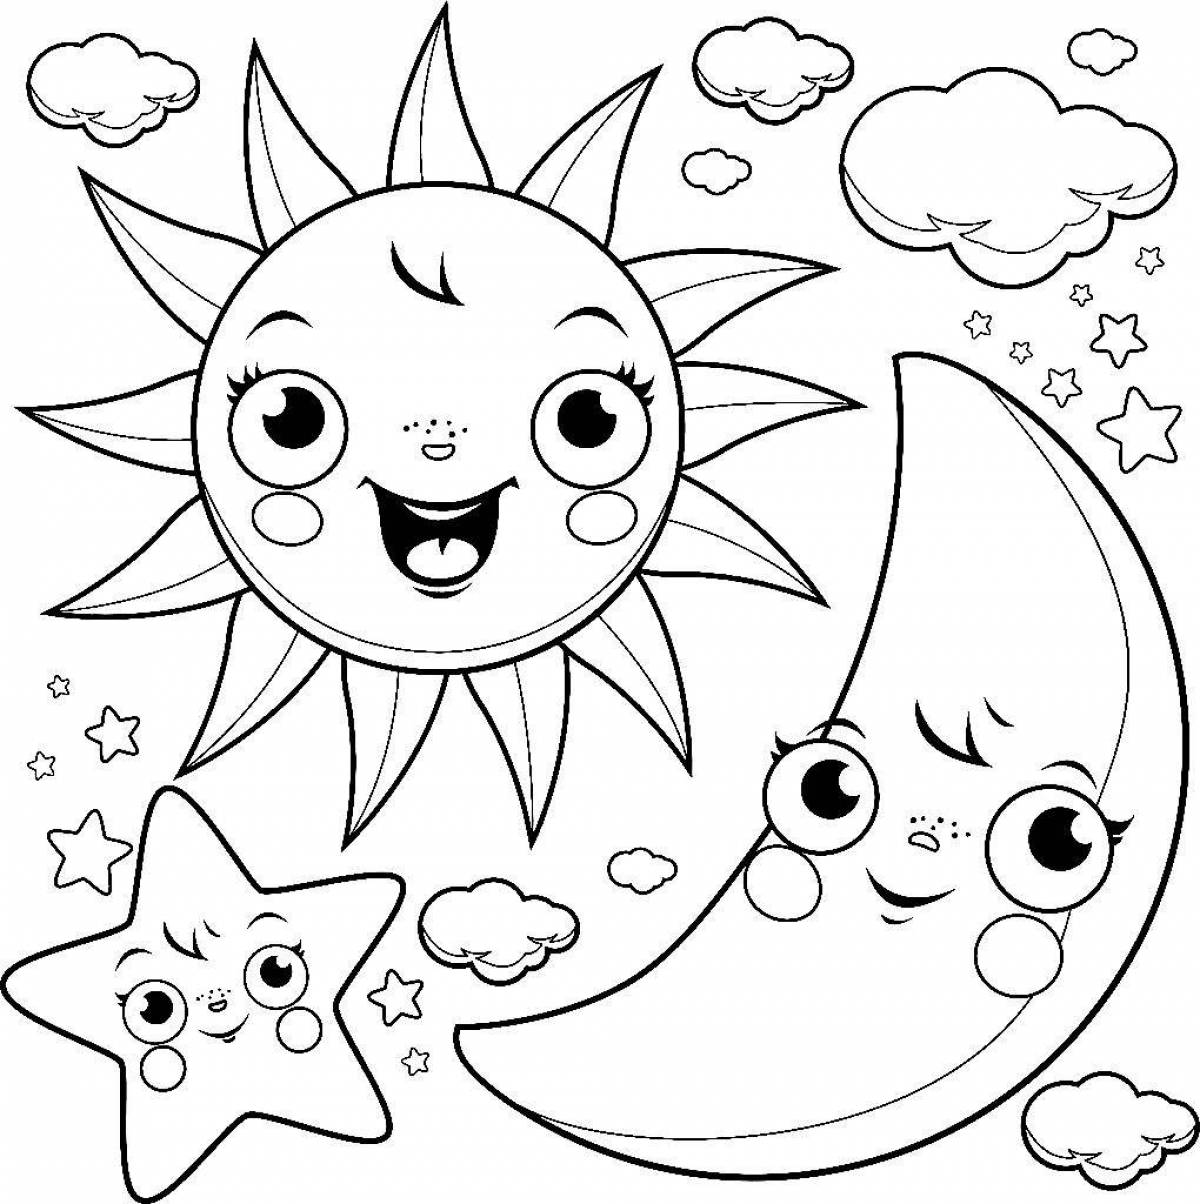 Great sun coloring book for kids 3-4 years old